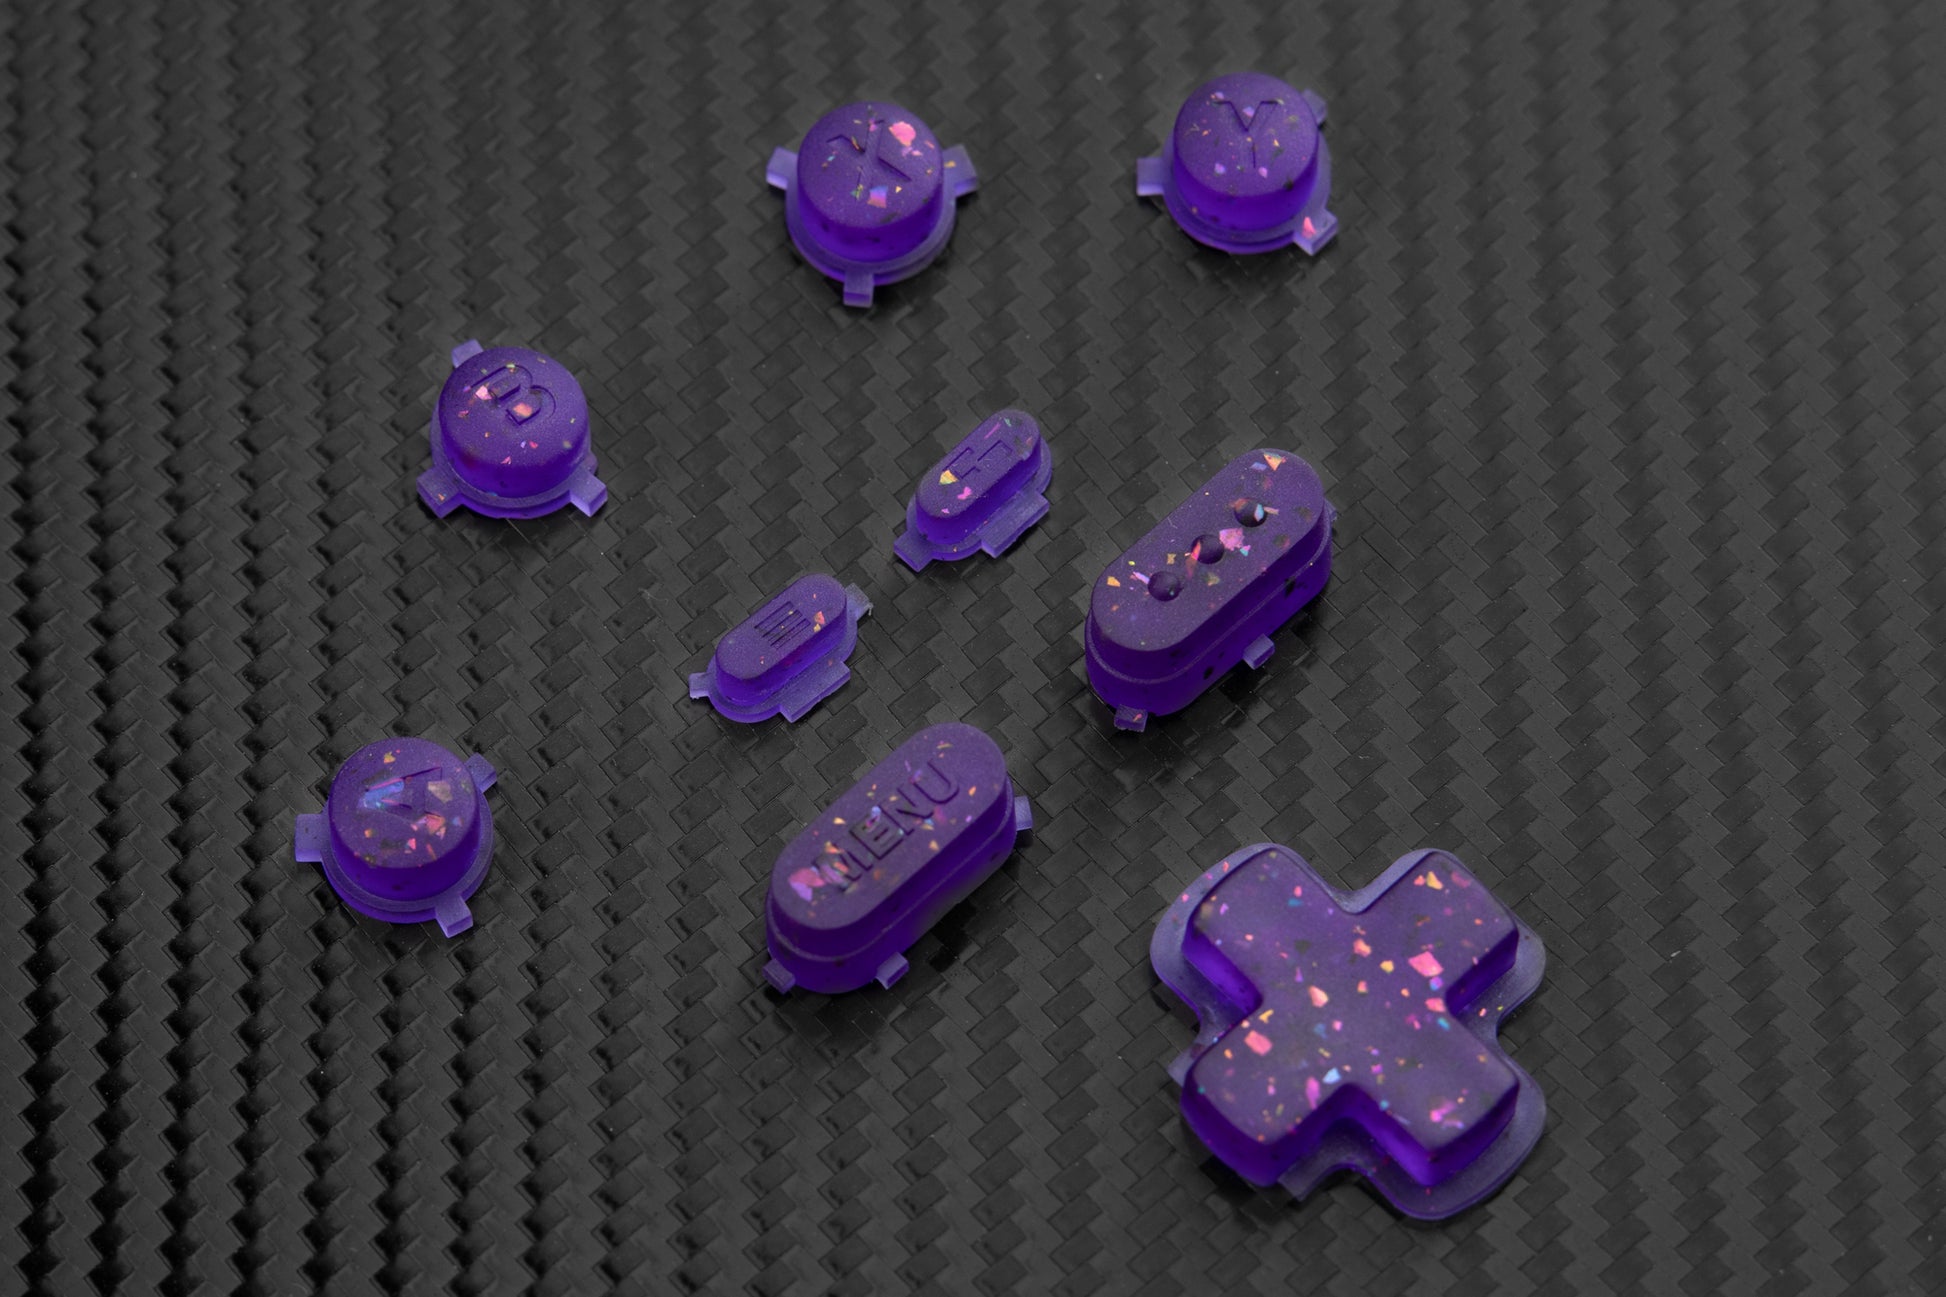 Transparent purple steam deck button set with metallic colored flakes mixed in. 